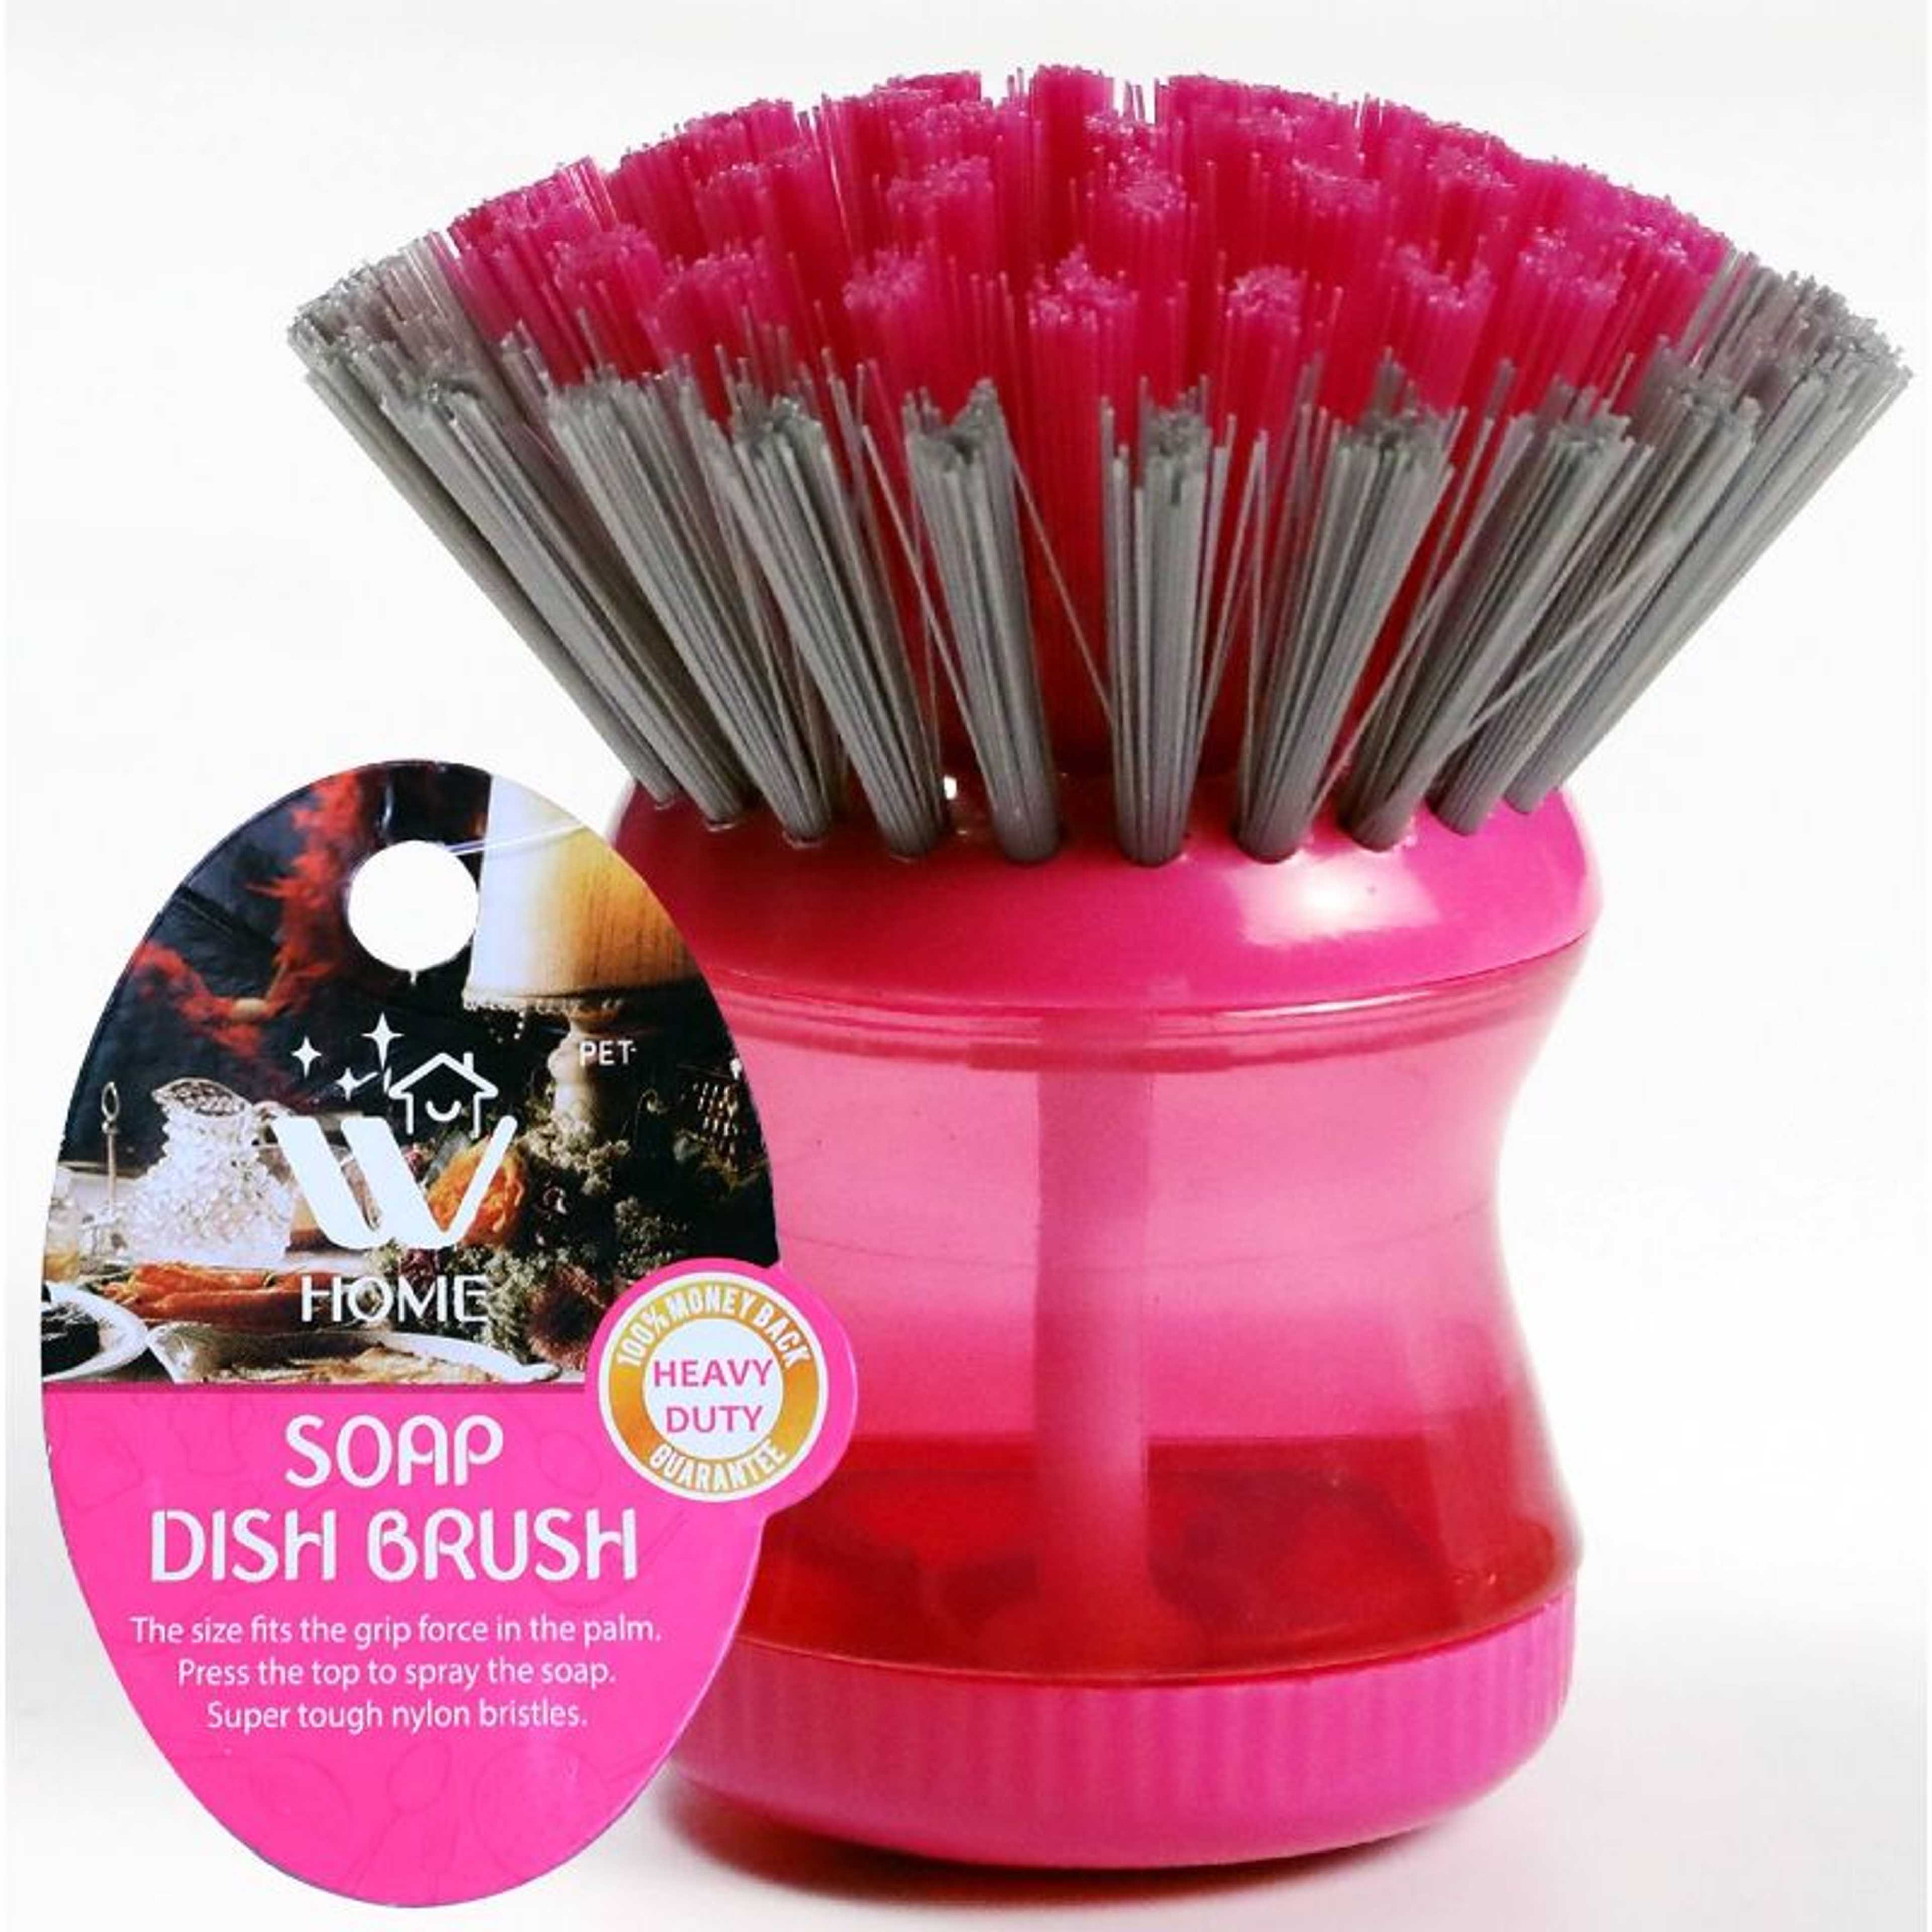 Dish Washing Multifunctional Palm Brush with Powerful Bristles With Liquid Soap Dispenser